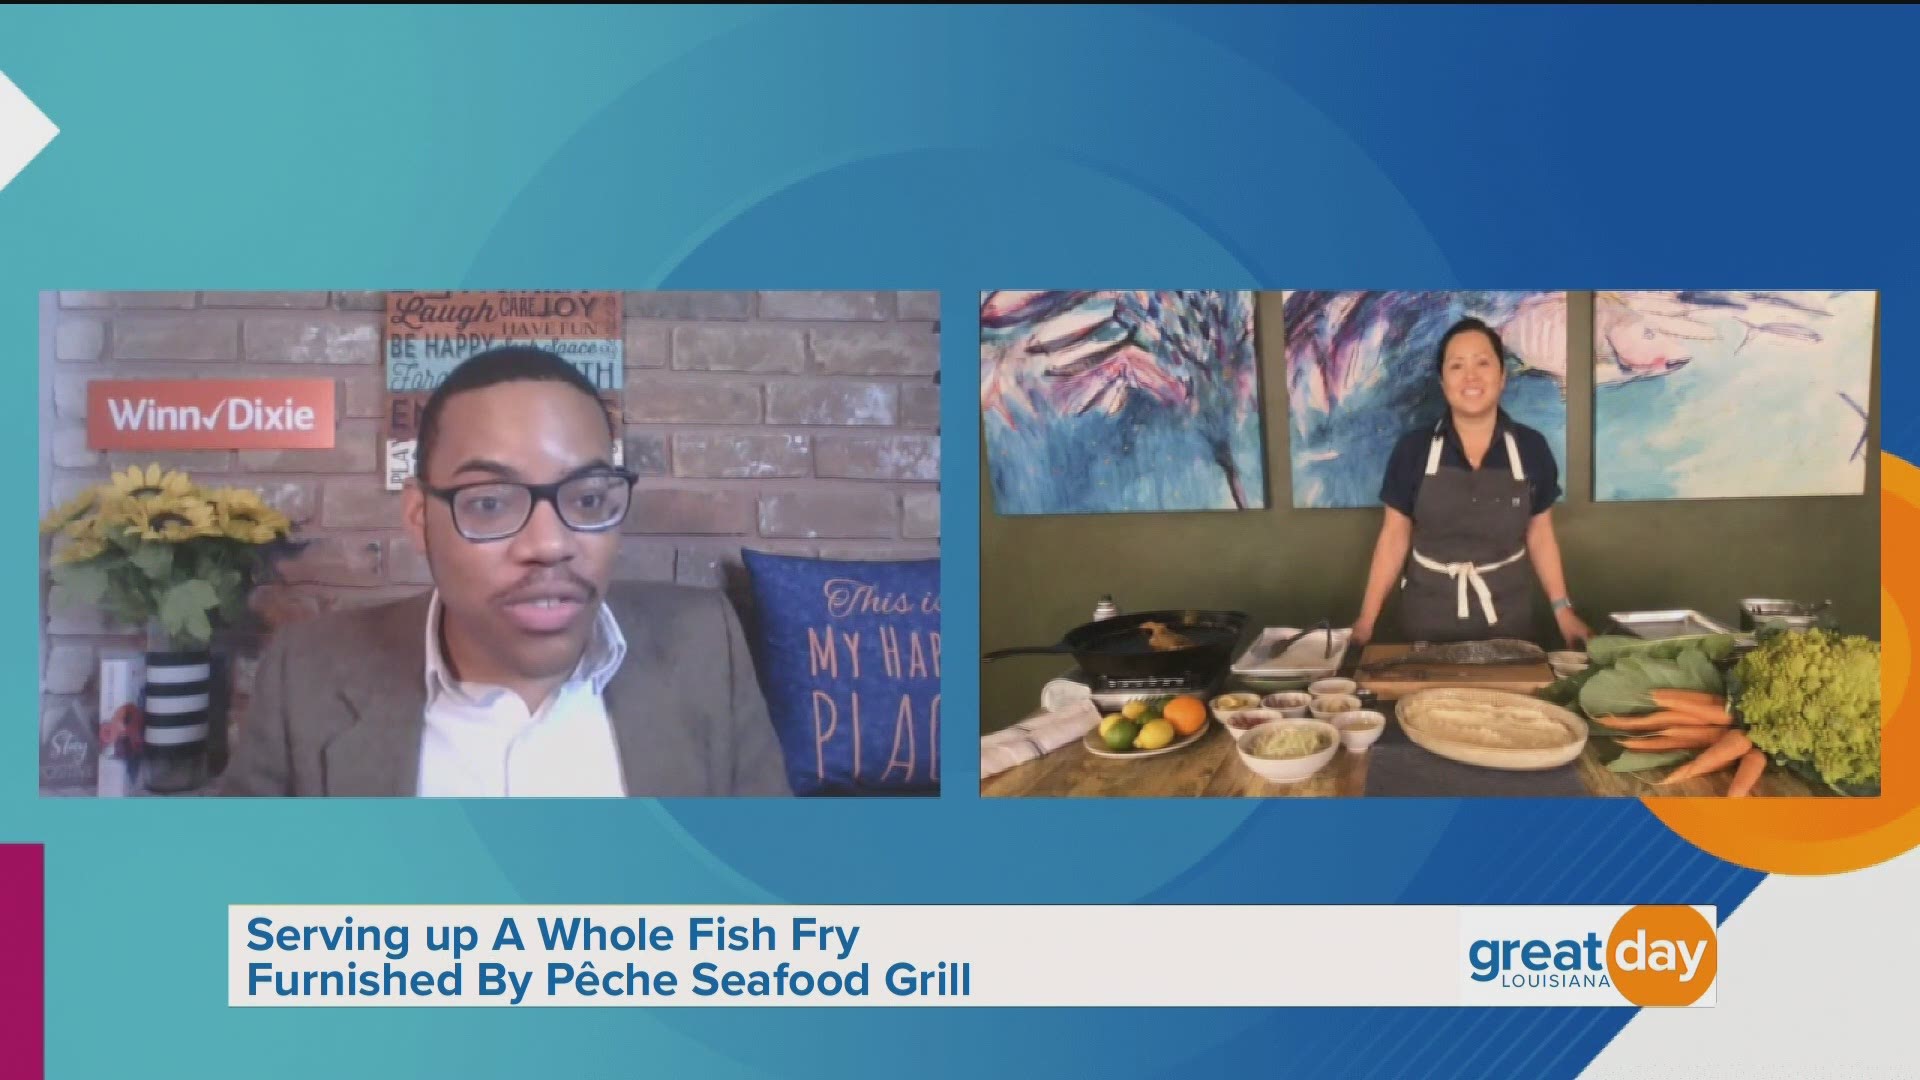 Péche Seafood Grill shared how to prepare a whole fish for the lent season.